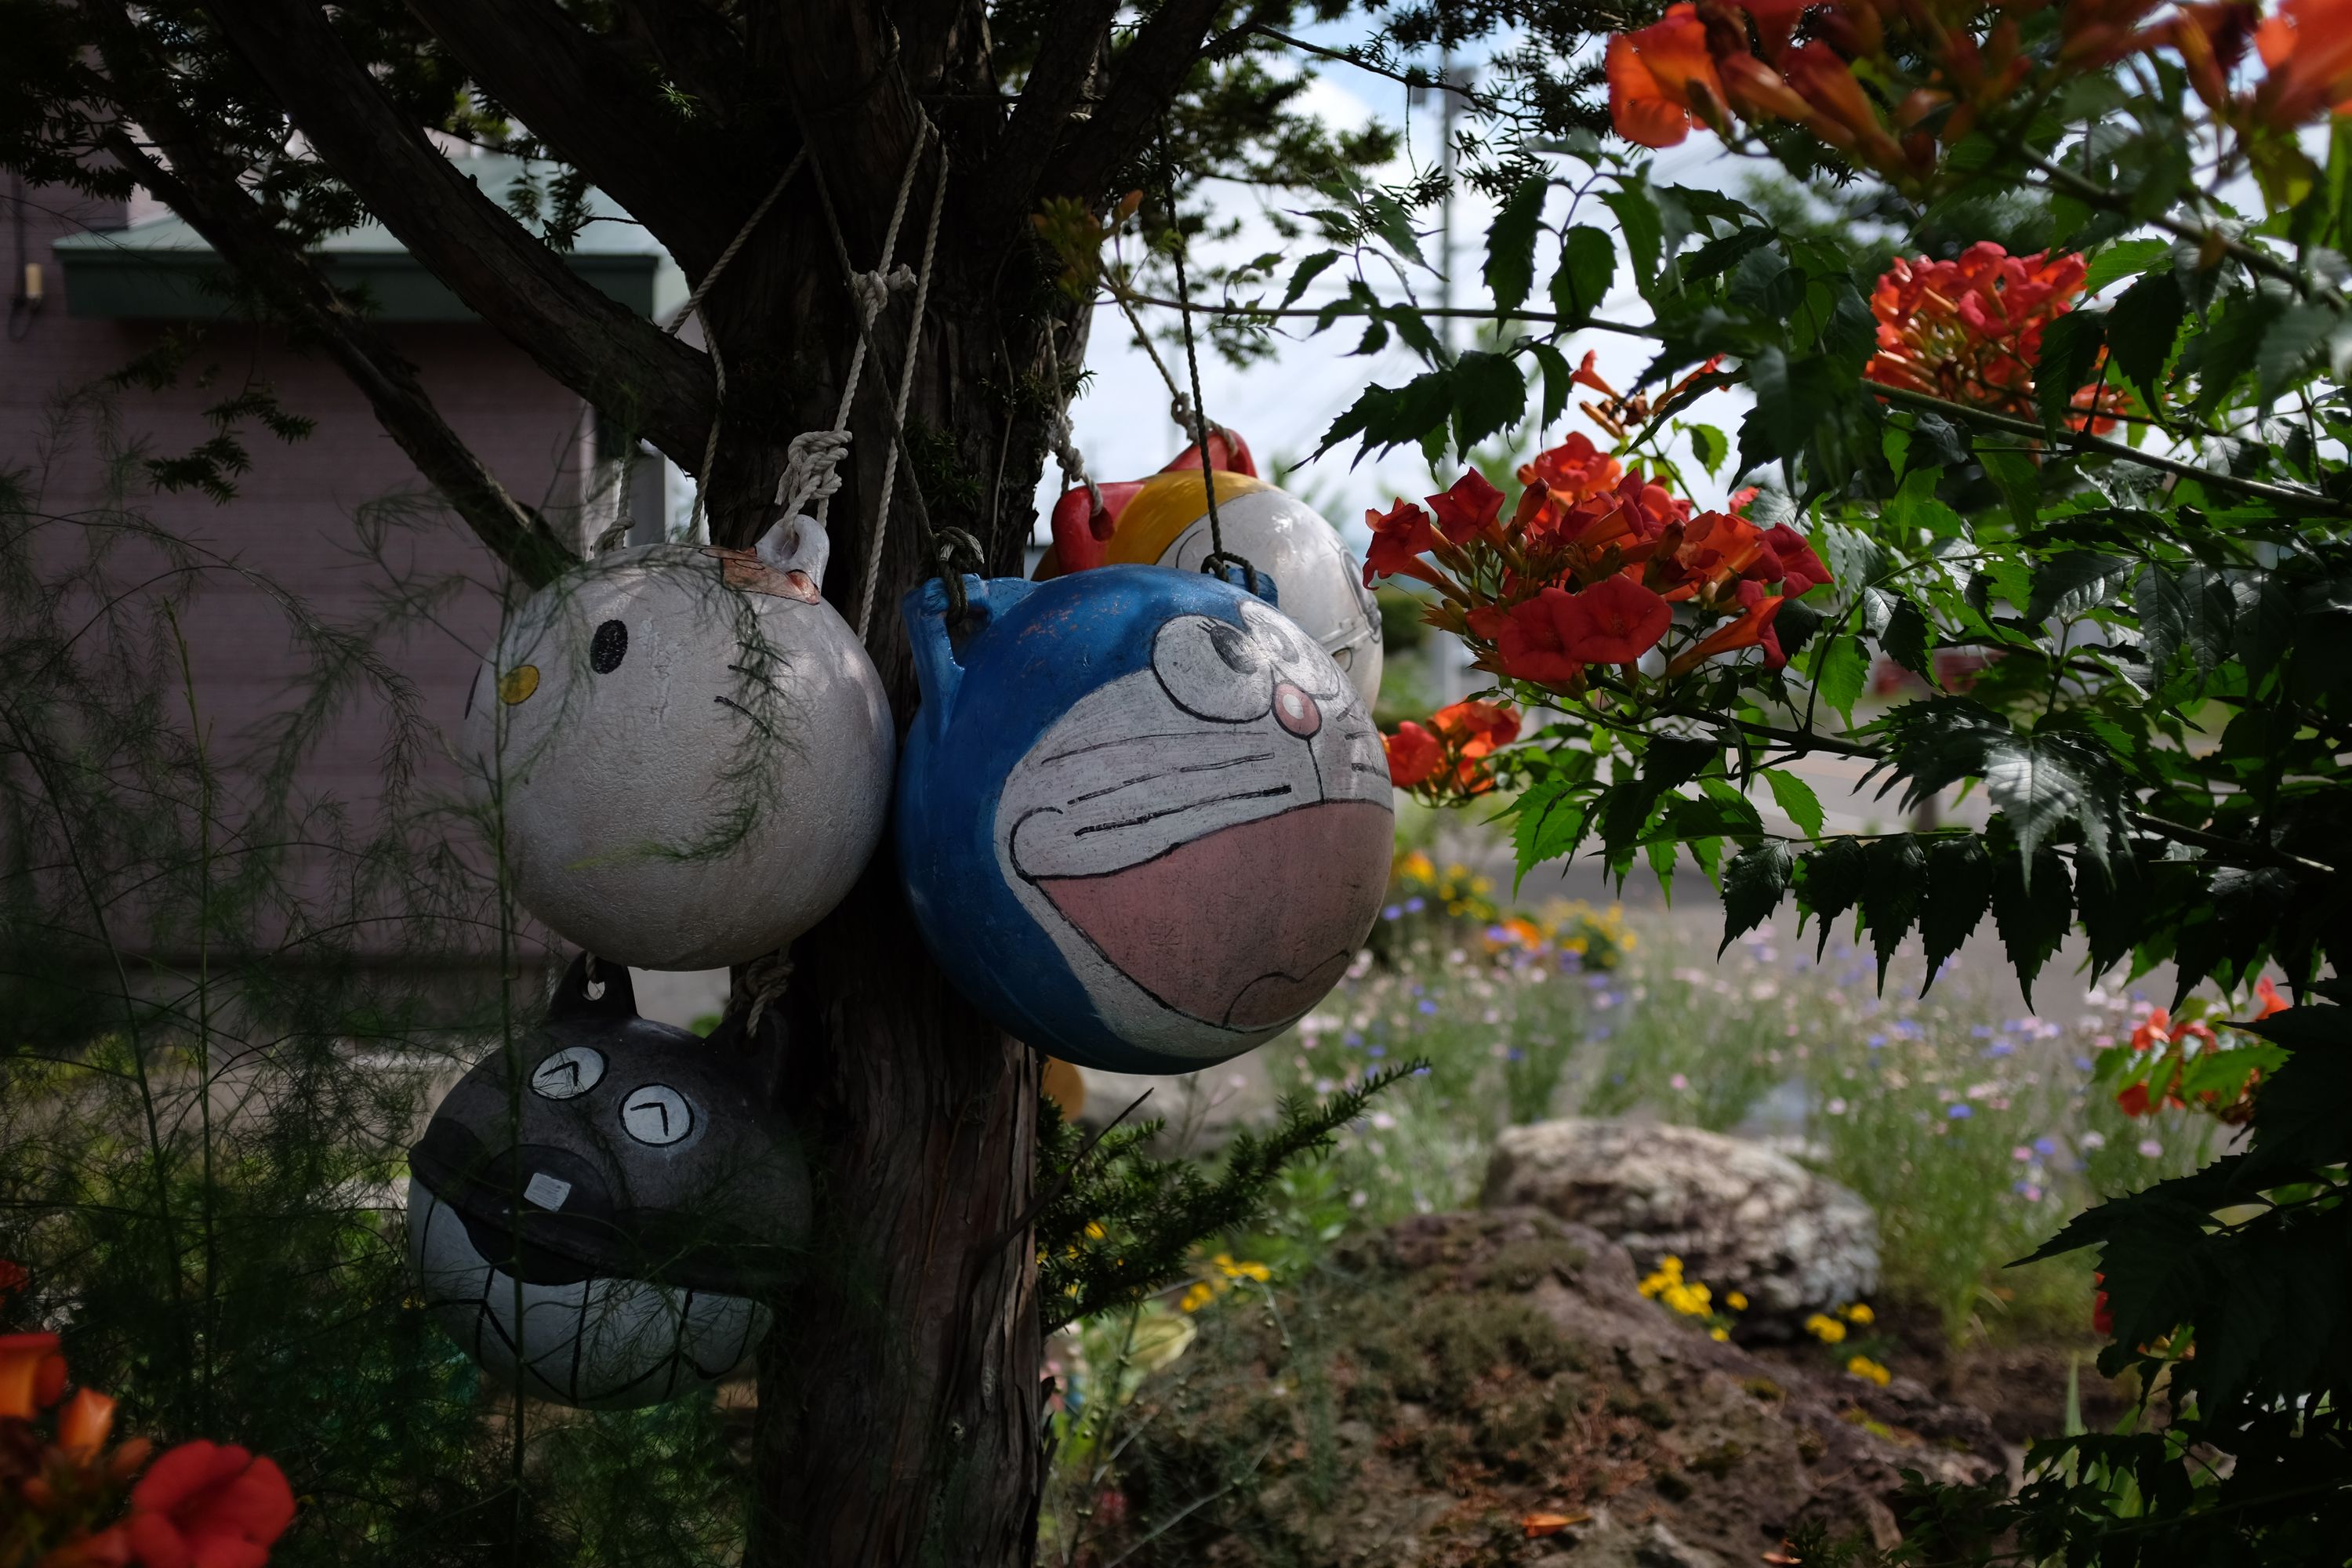 Fishing floats painted to look like various cartoon characters hand from a tree next to a flowering bush.